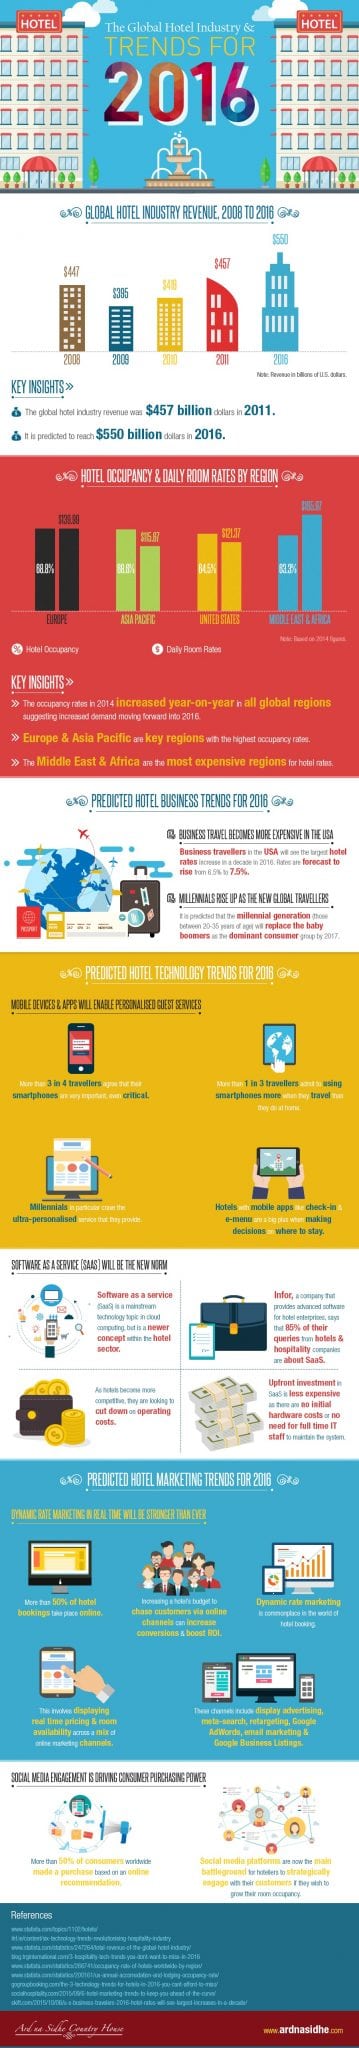 The Global Hotel Industry and Trends for 2016 Infographic